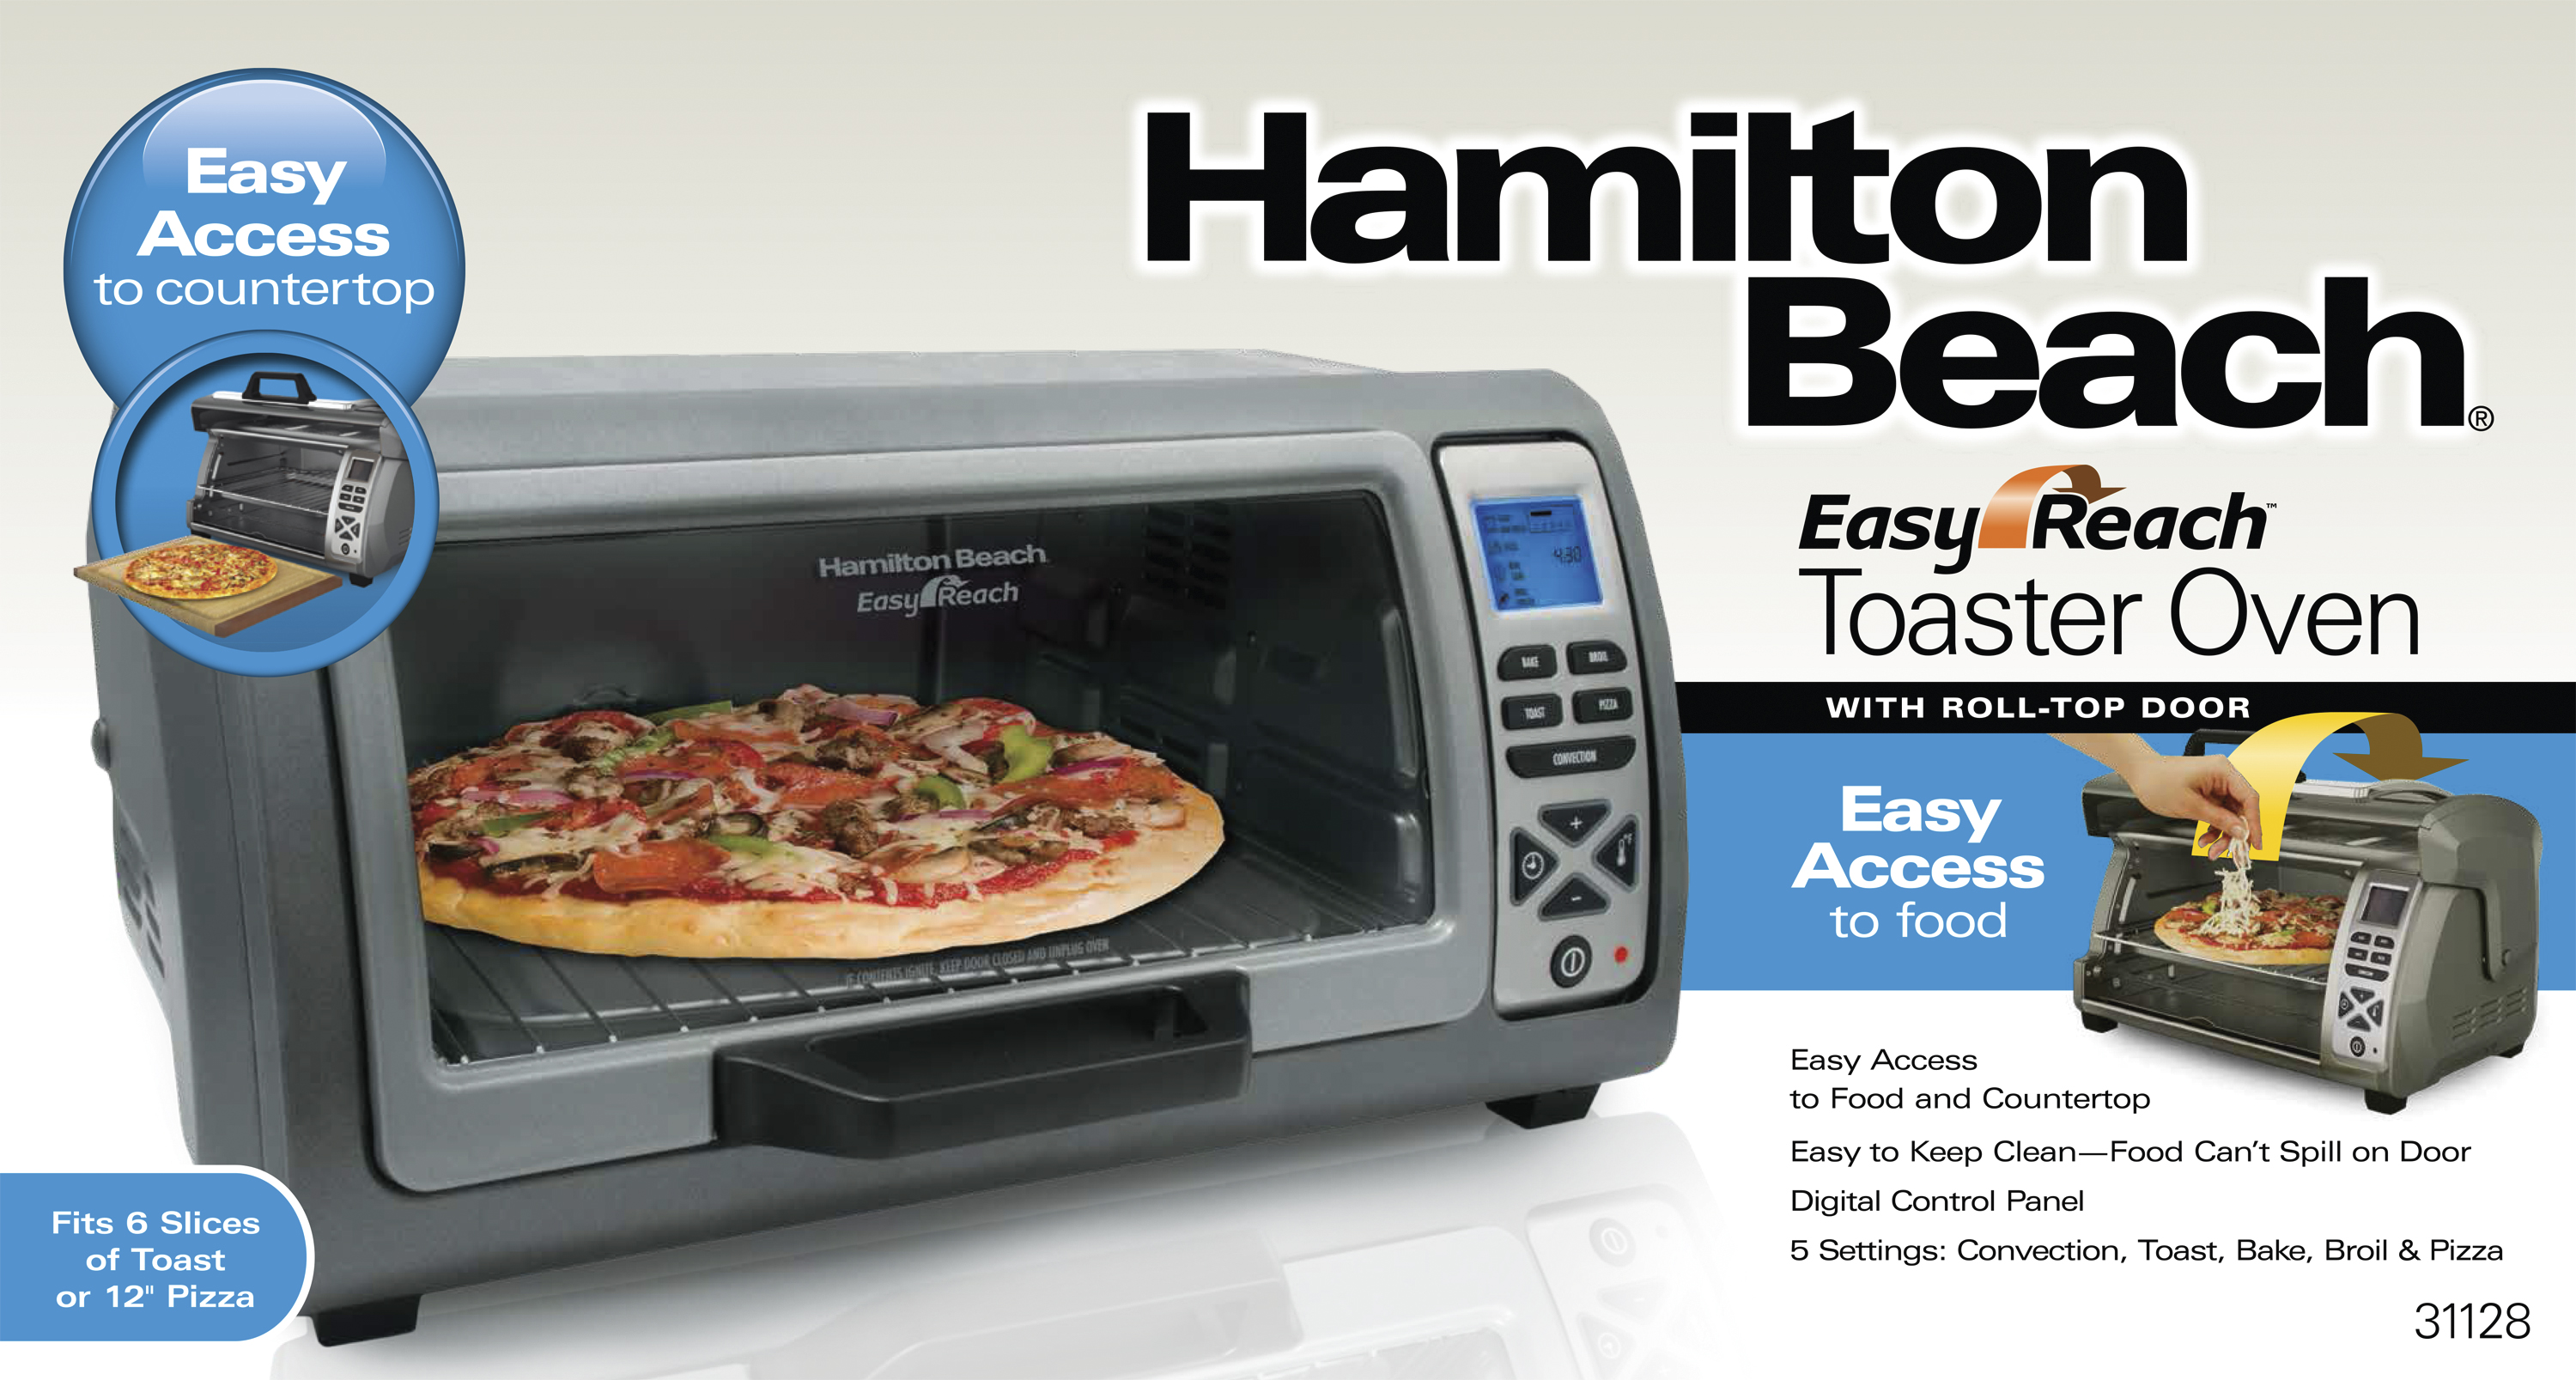 Hamilton Beach Easy Reach Toaster Oven with Roll-Top Door, Silver, 31128 - image 2 of 9